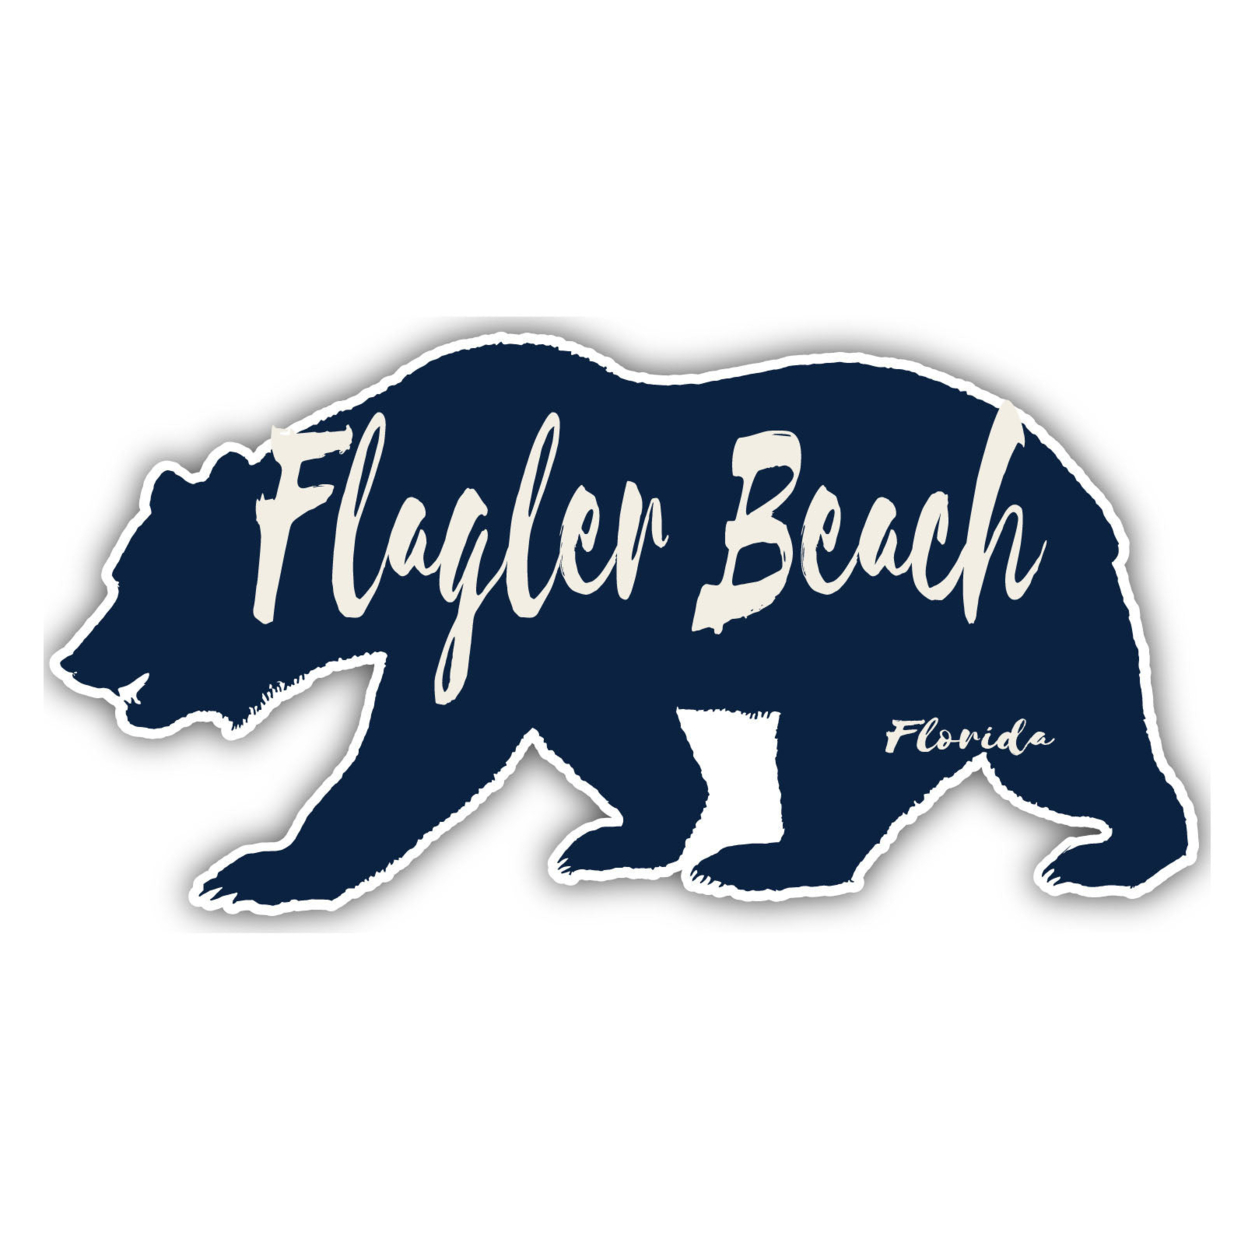 Flagler Beach Florida Souvenir Decorative Stickers (Choose Theme And Size) - 4-Pack, 2-Inch, Camp Life